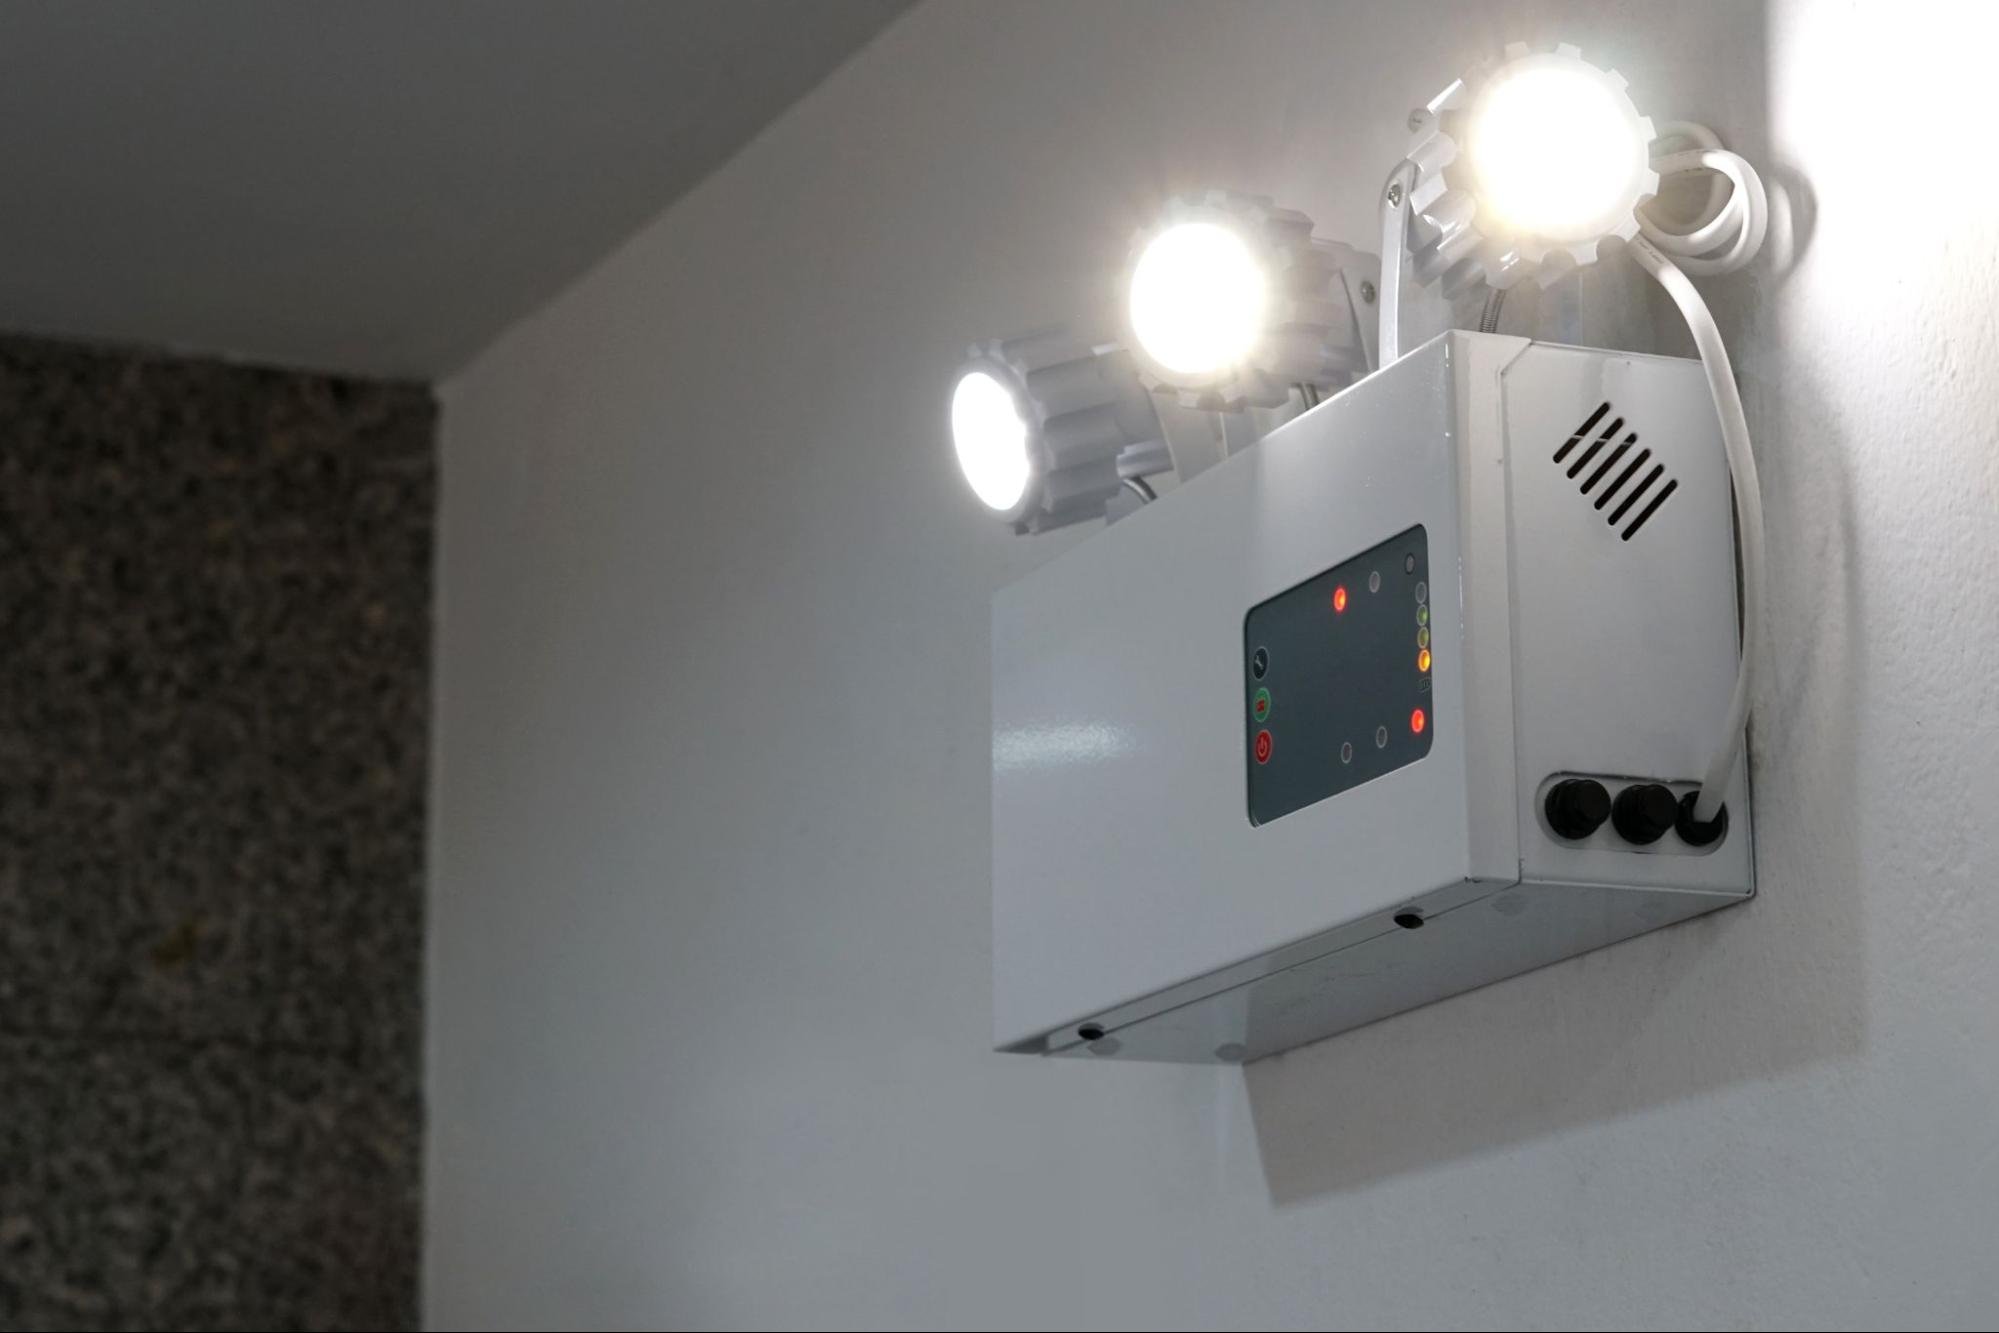 How to test your emergency lighting - MAGG Fire Services